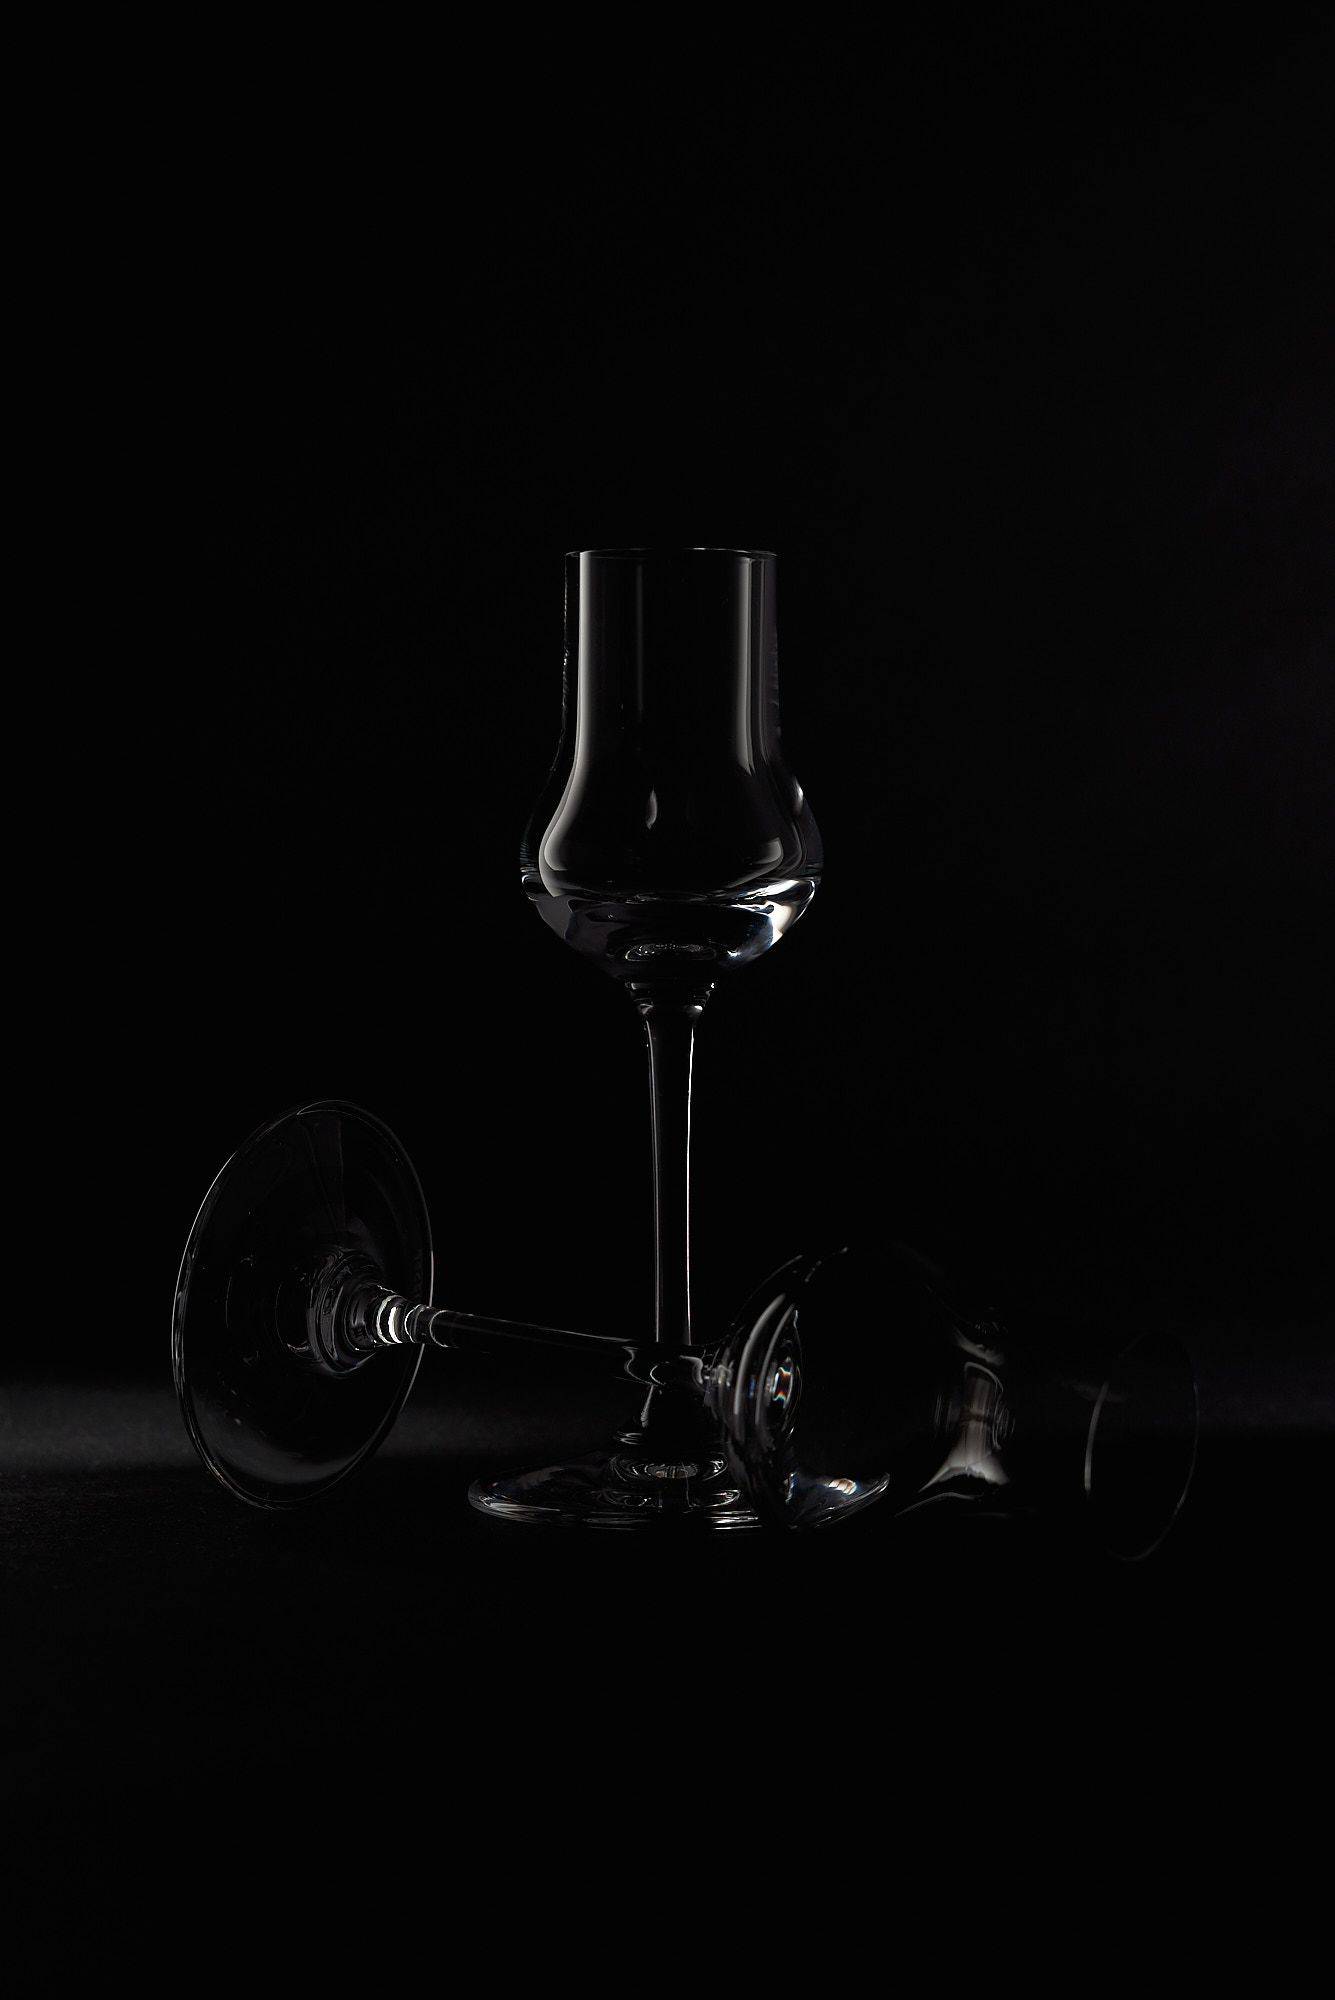 riedel veritas spirits and nosing glass on black background